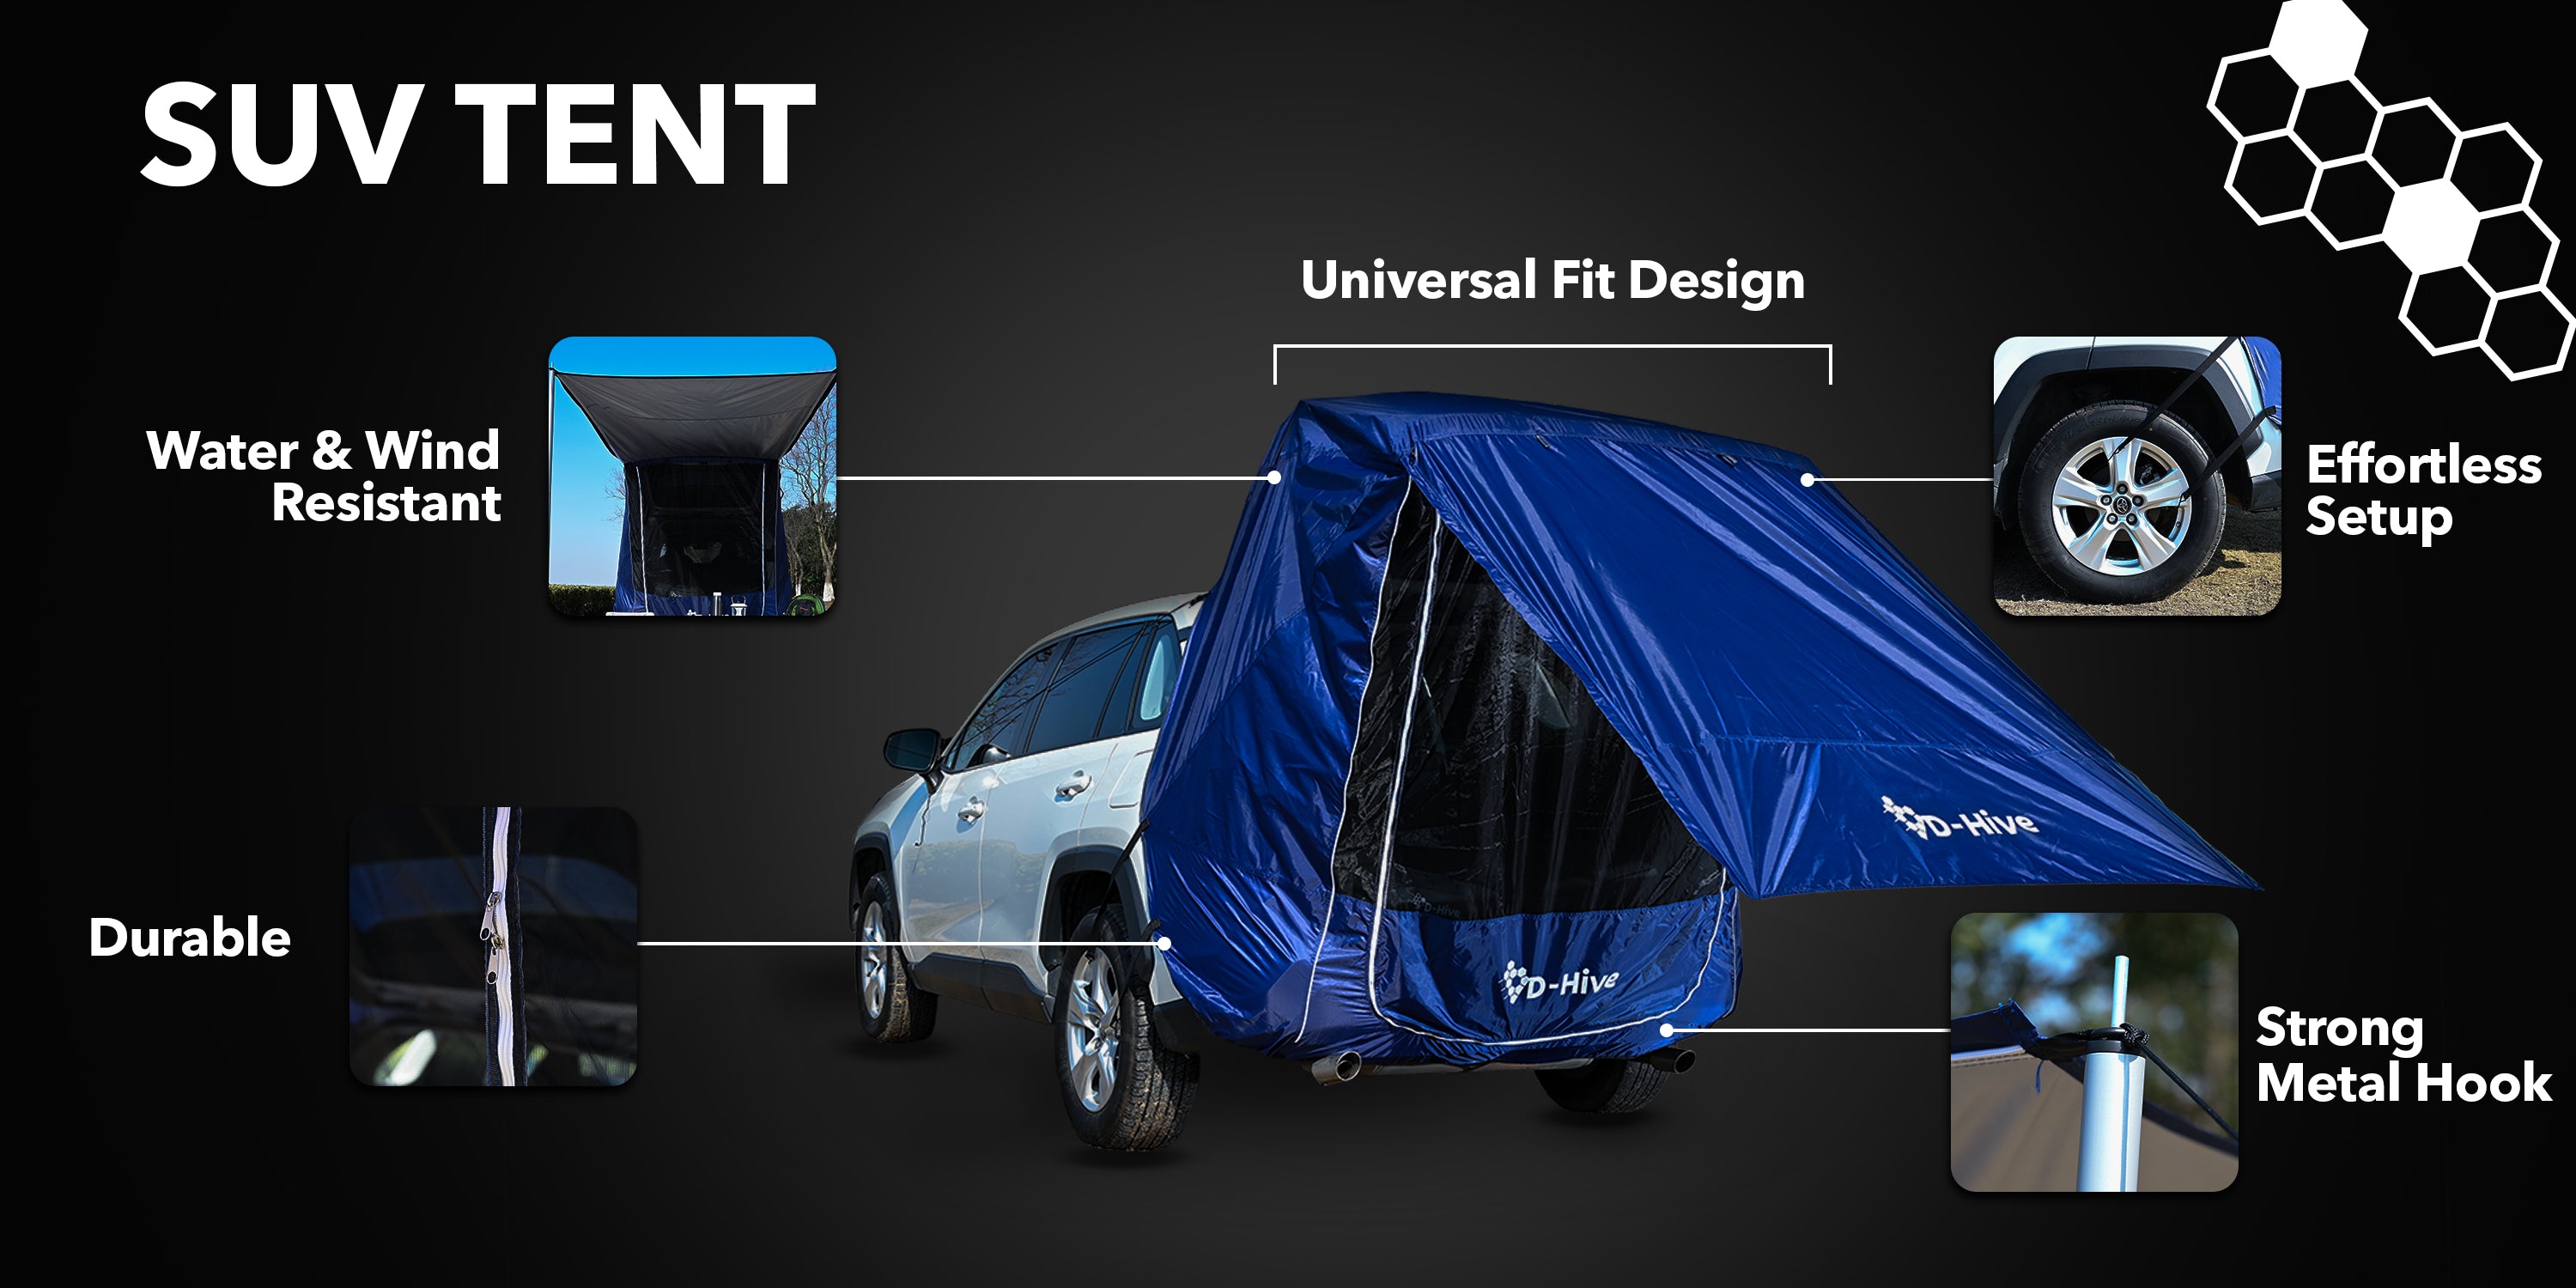 D-hive SUV Car tailgate Tent car camping outdoor camping gear blue 